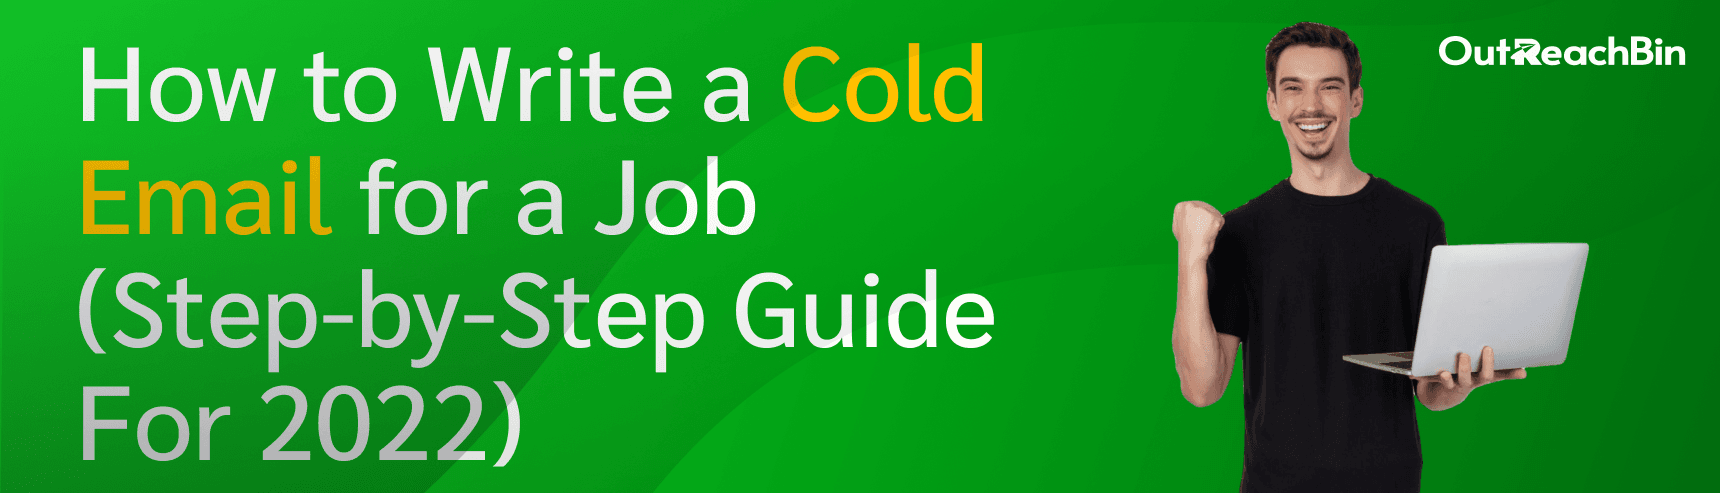 How to Write a Cold Email for a Job (Step-by-Step Guide For 2022) cover